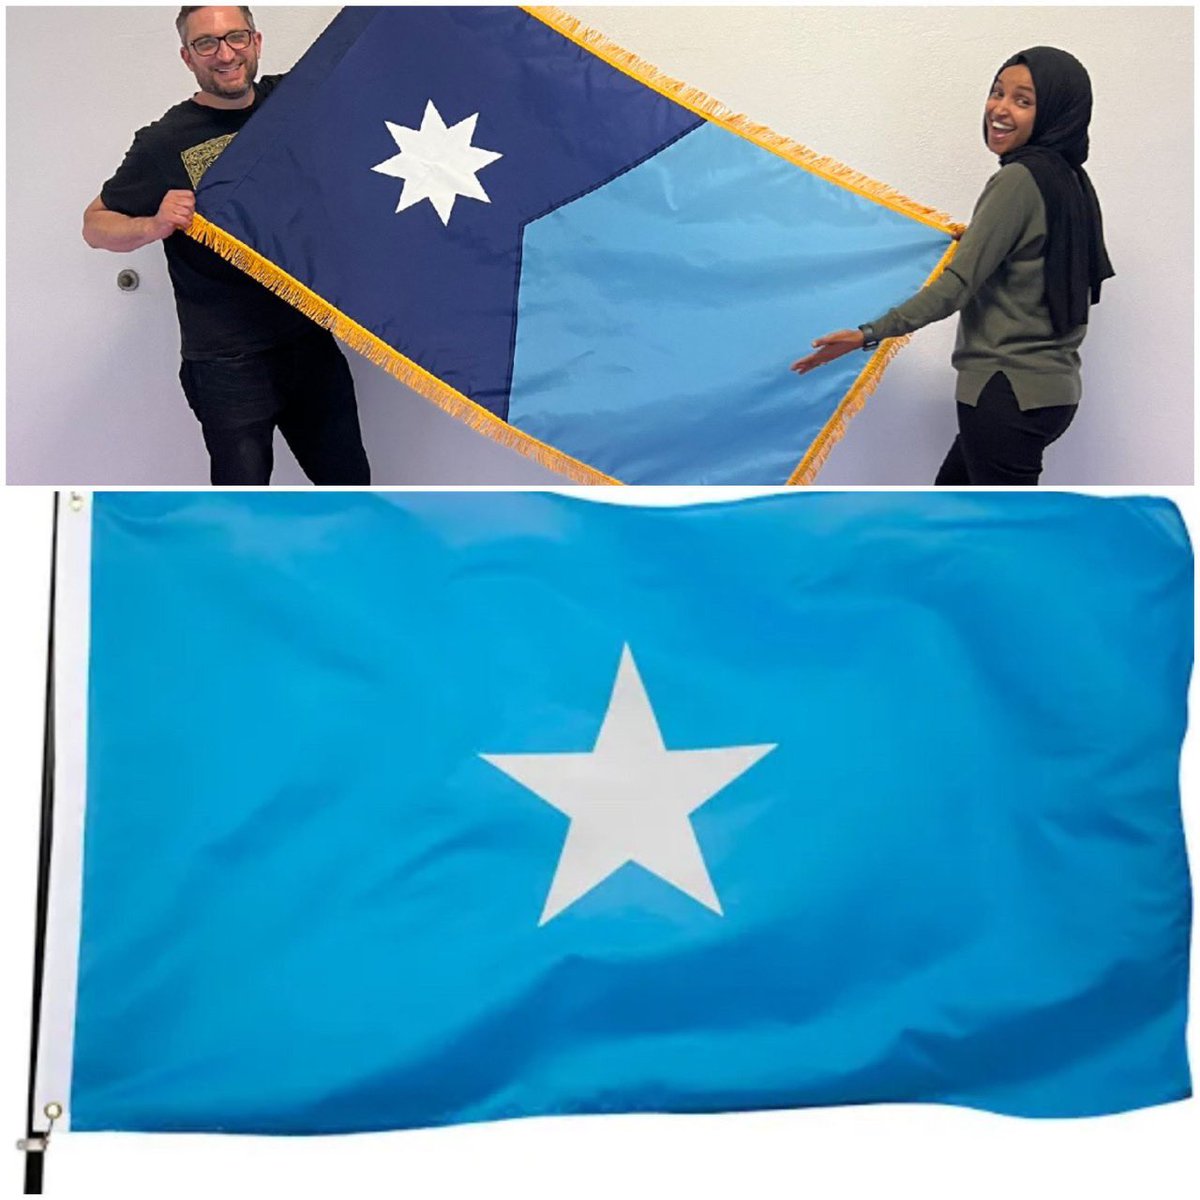 BREAKING: The State of Minnesota has changed its state flag, and it is similar to the flag of Somalia, from which the American hating Ilhan Omar originated.